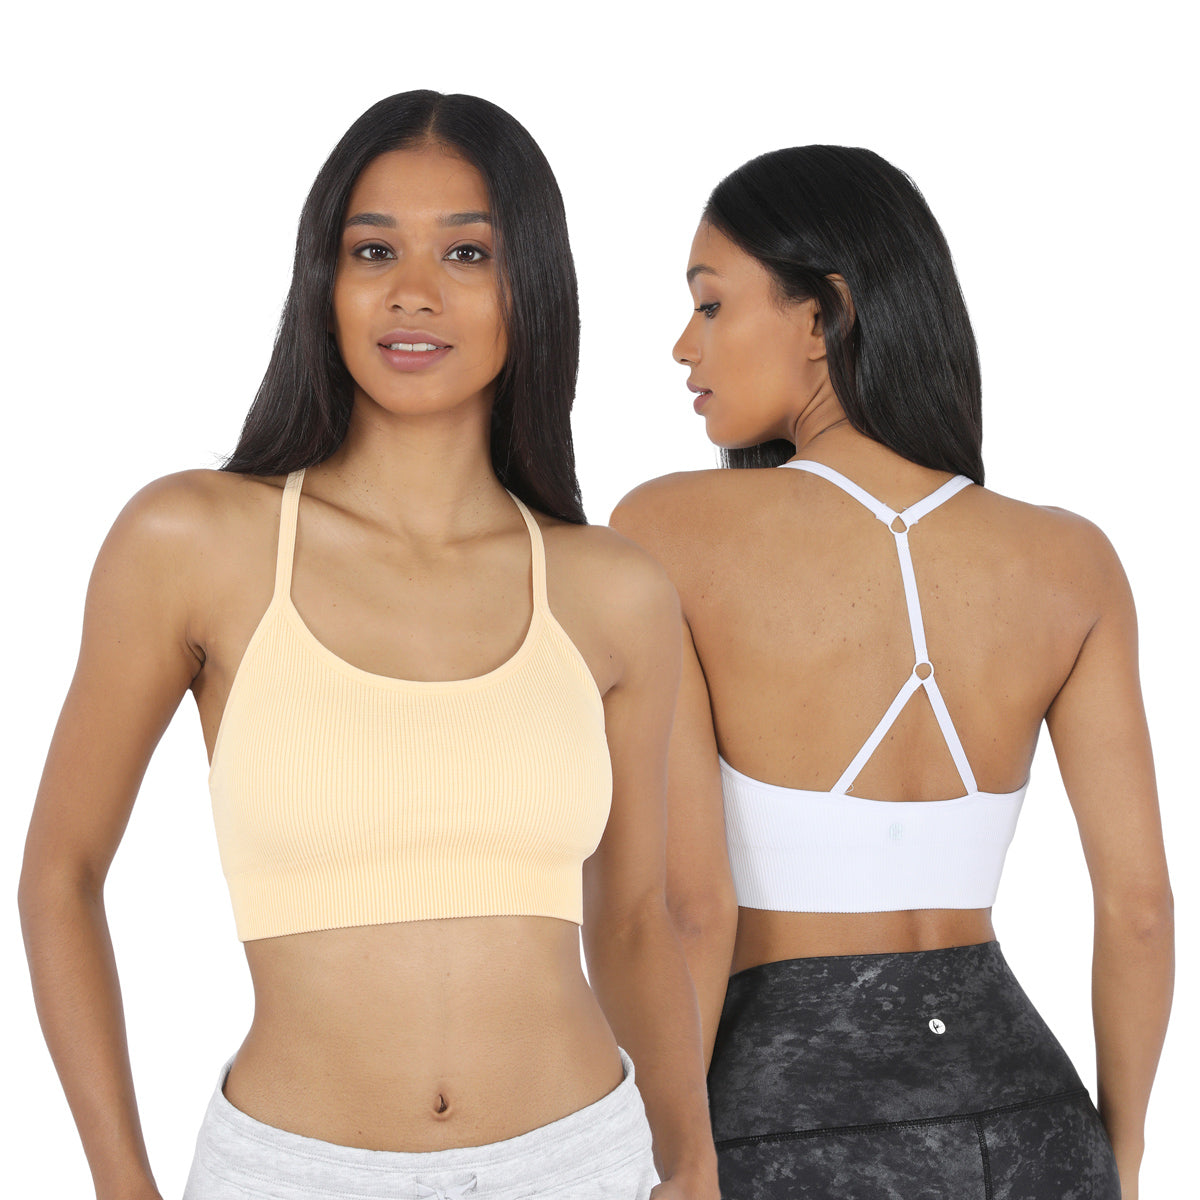 Pack of 2 seamless ribbed bras - NEW IN - Woman 